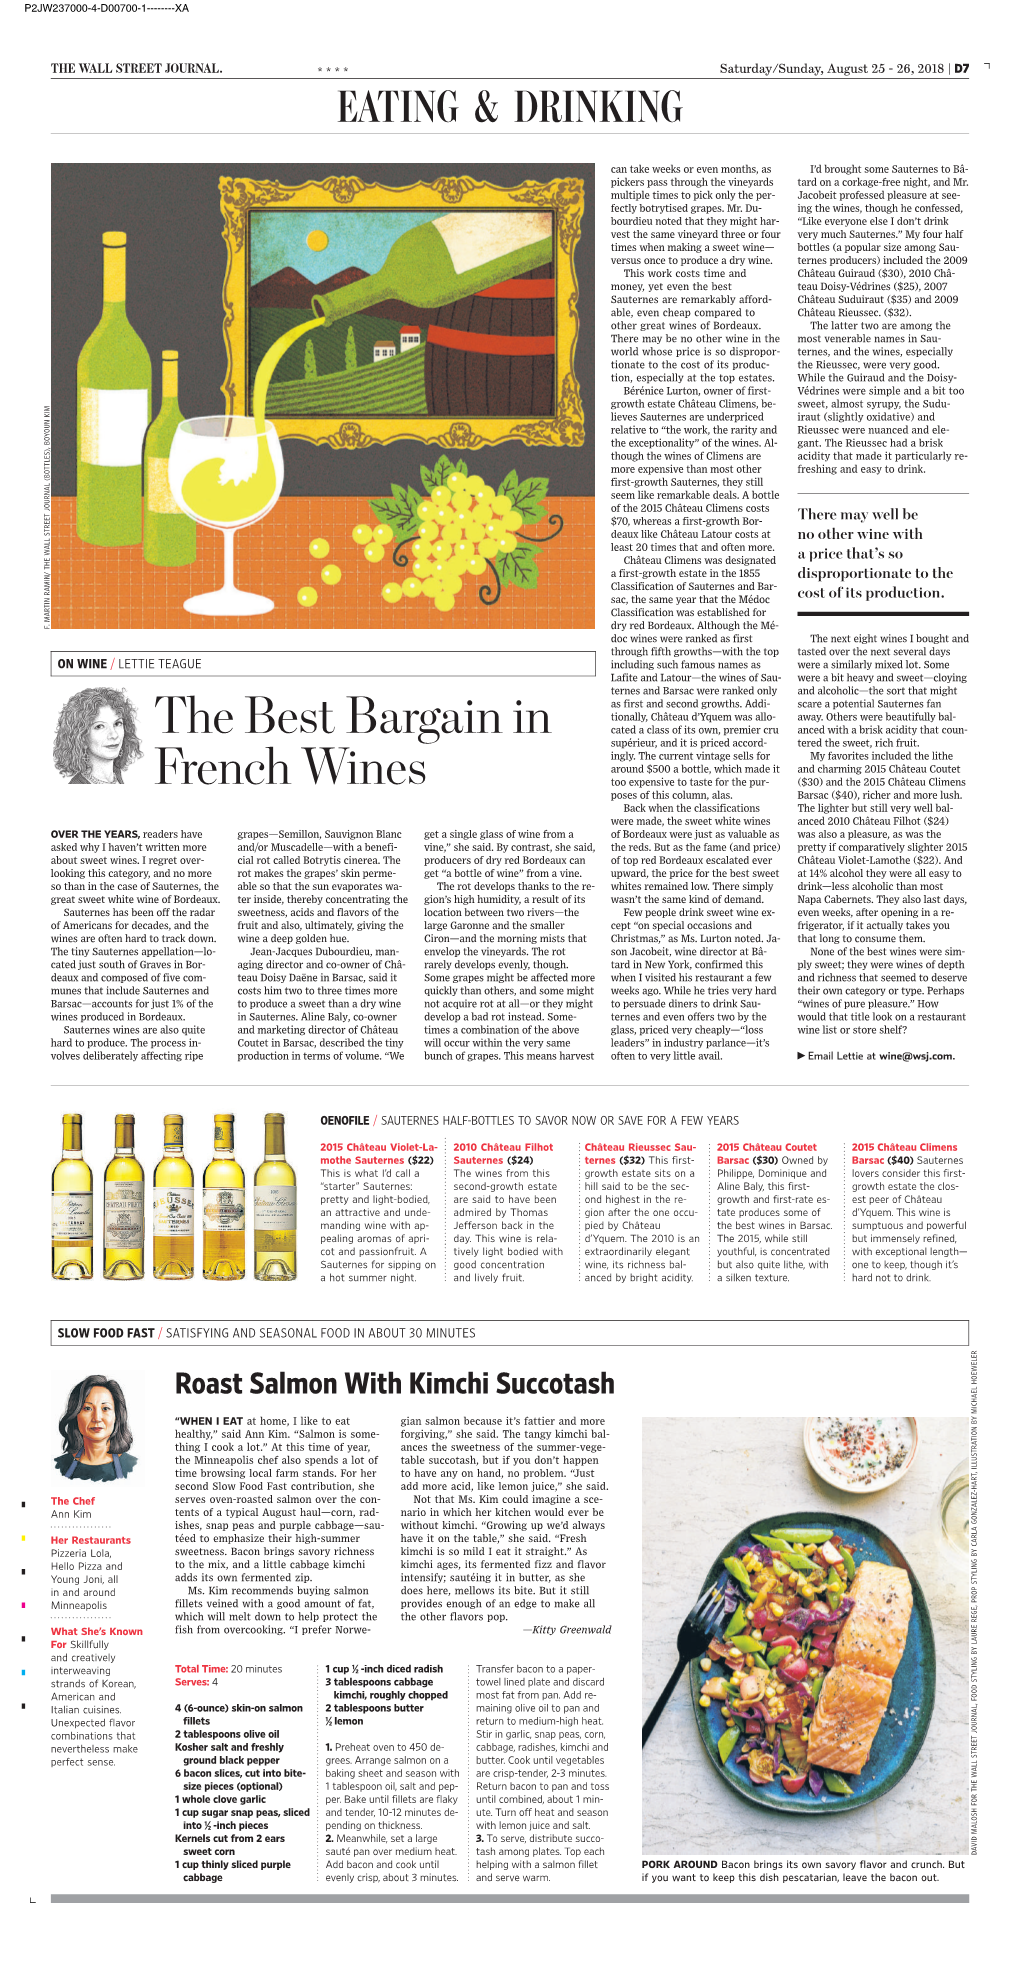 The Best Bargain in French Wines